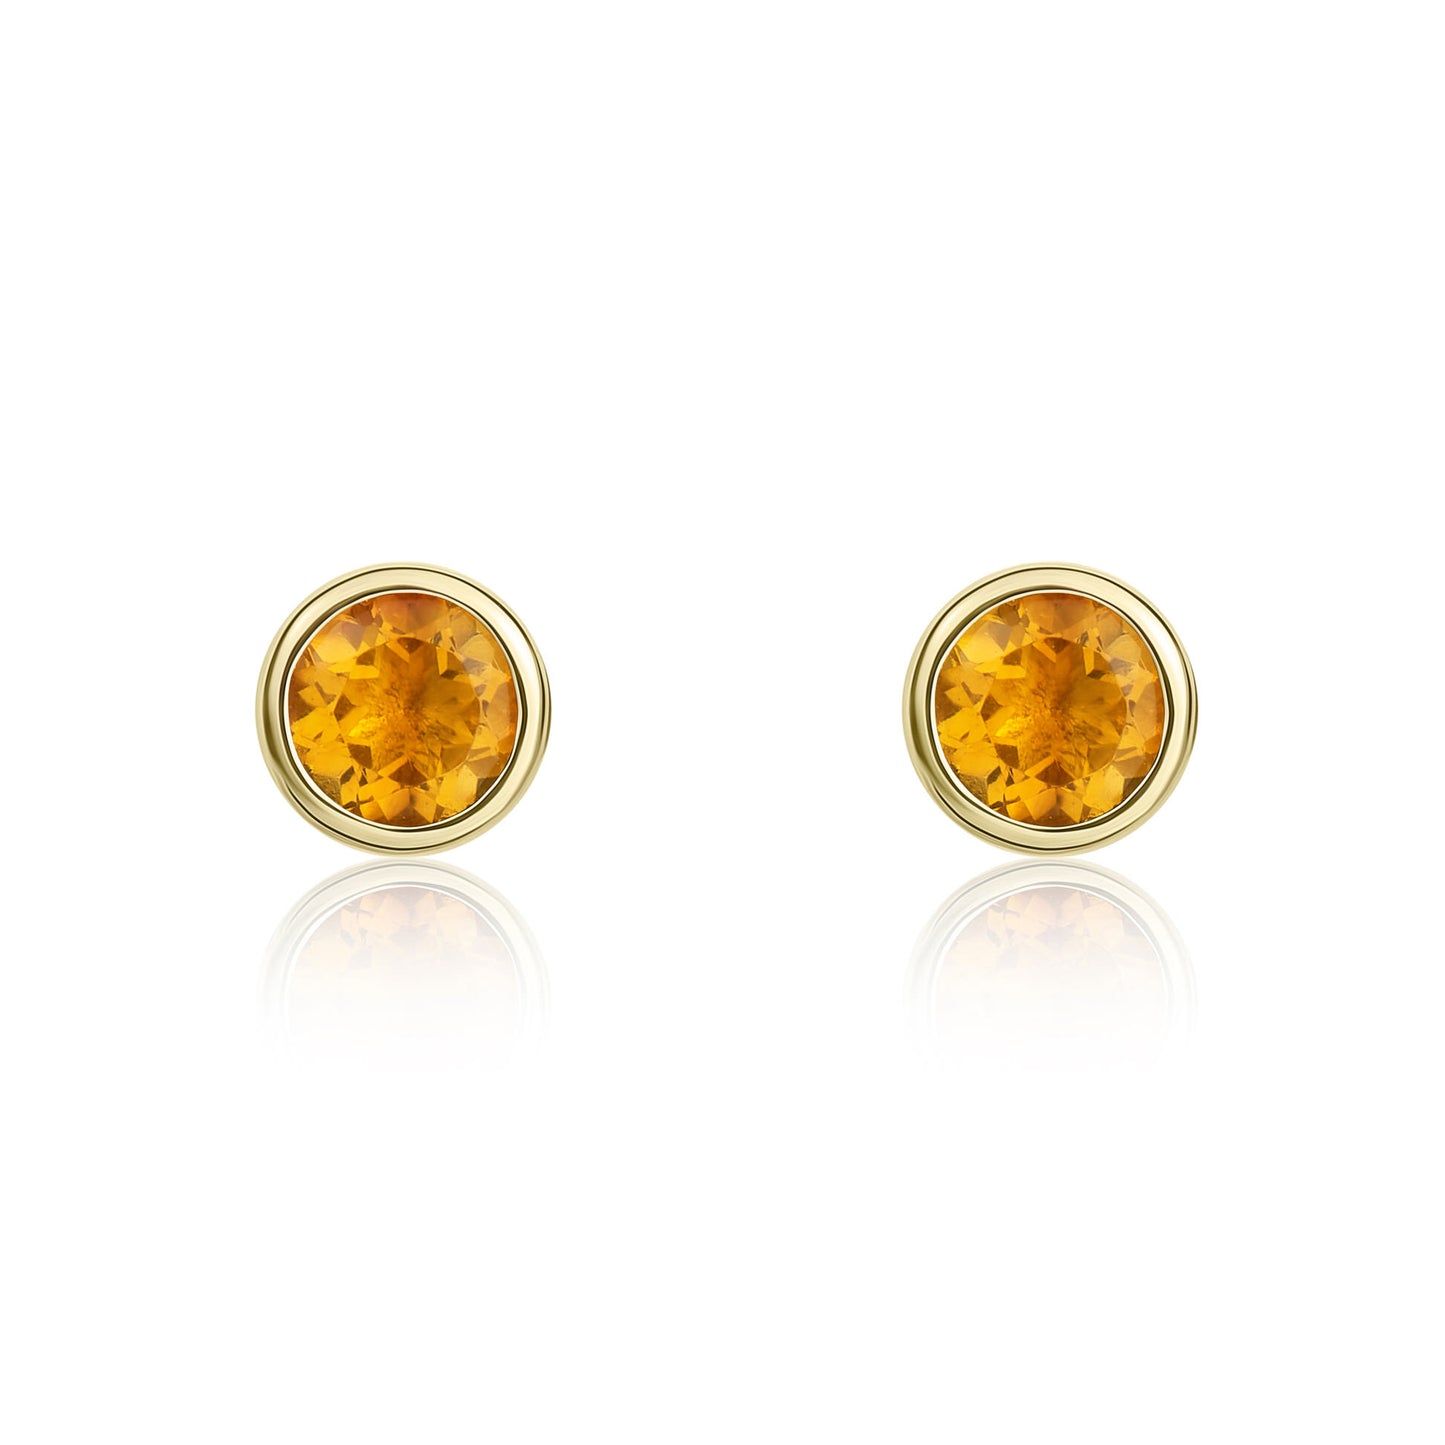 9K Yellow Gold 3mm Round Citrine Stud Earrings